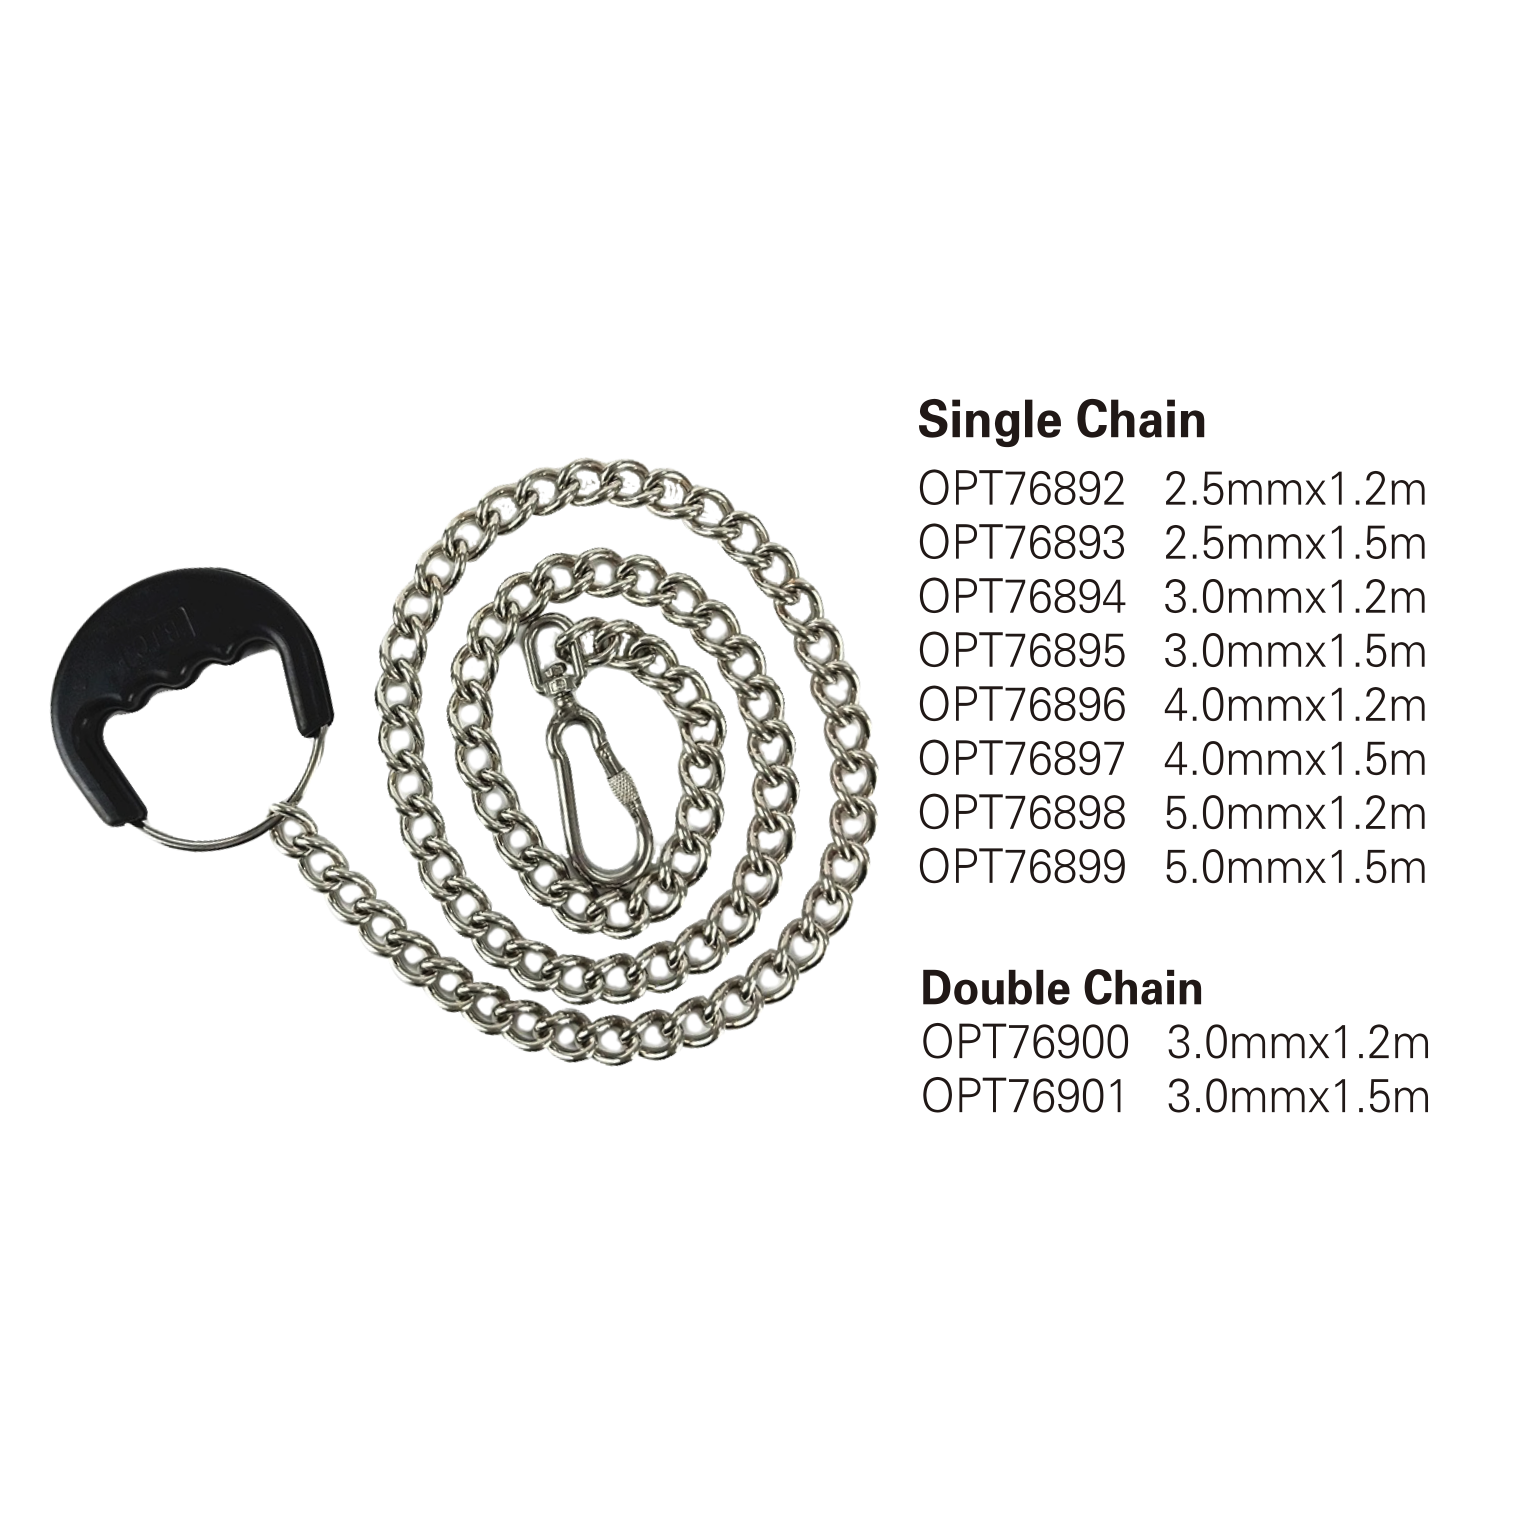 OPT76892-OPT76901 S.S. Chain leads